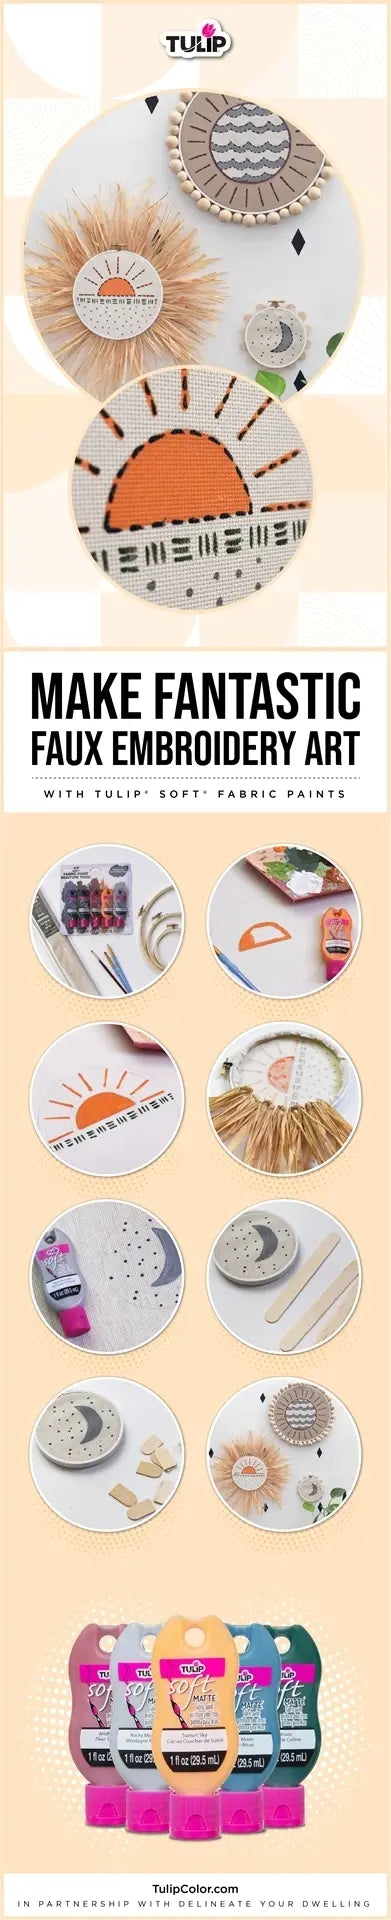 Fabric Paint Faux Embroidery Painting Tutorial